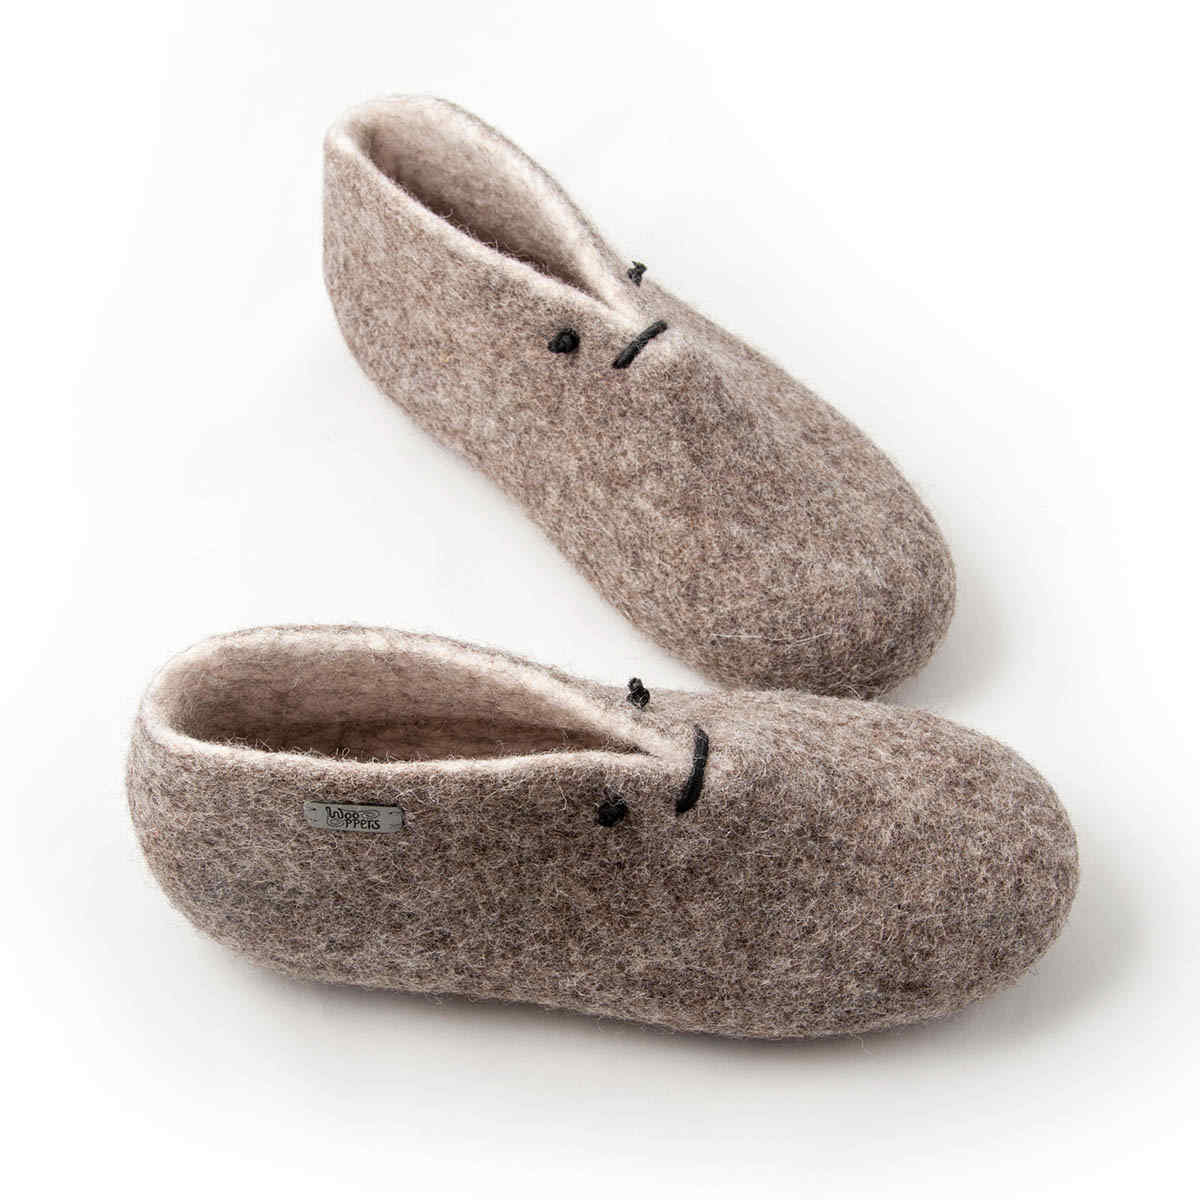 Slipper booties in grey and white 49707